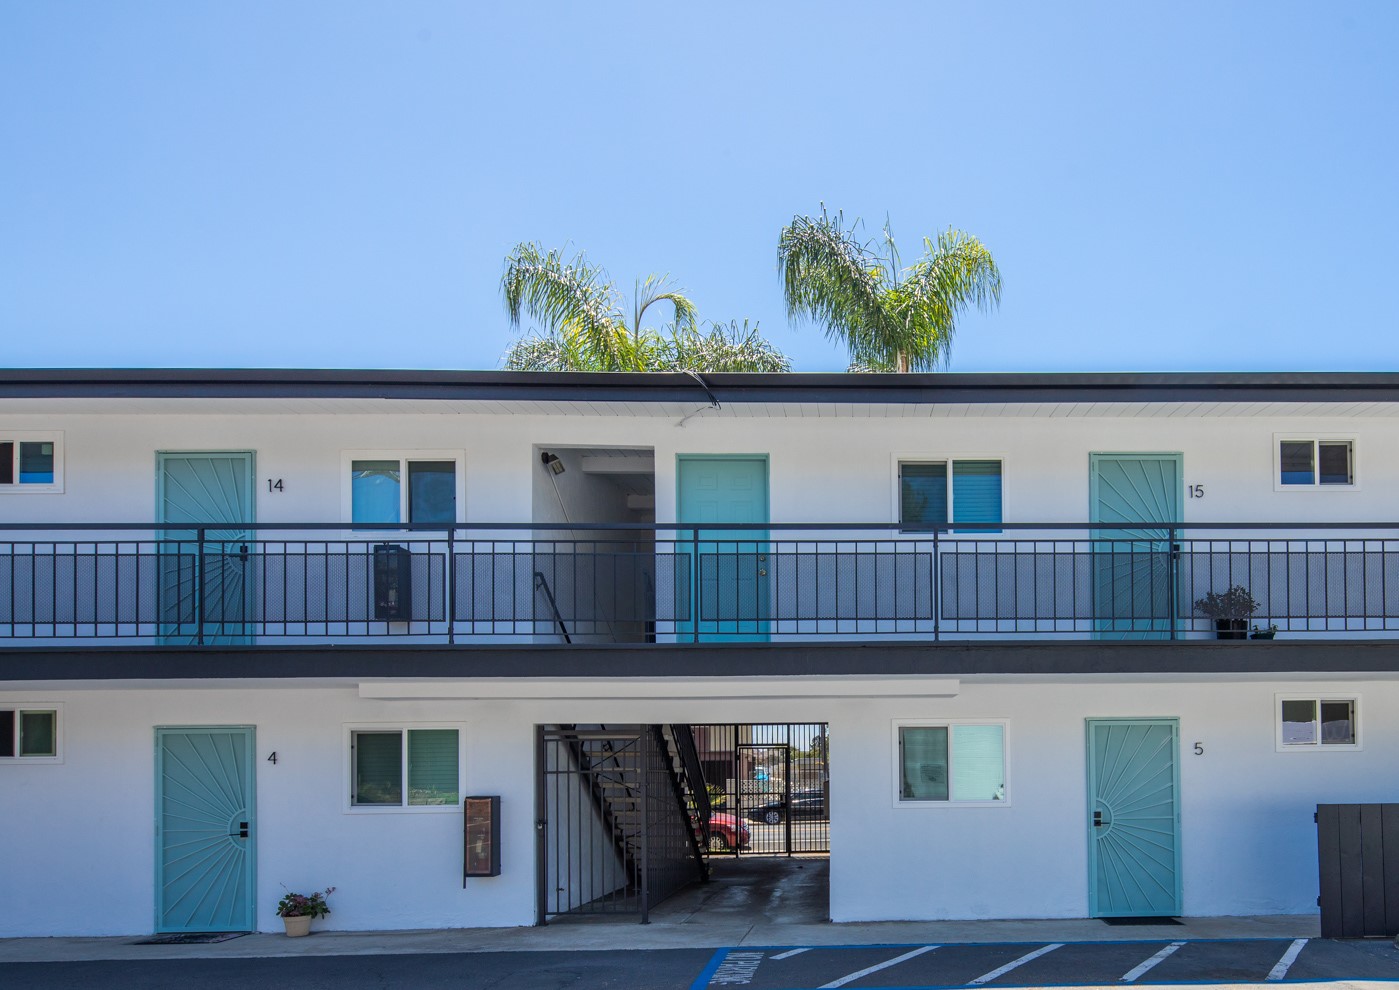 Point Loma Palms Apartment Homes